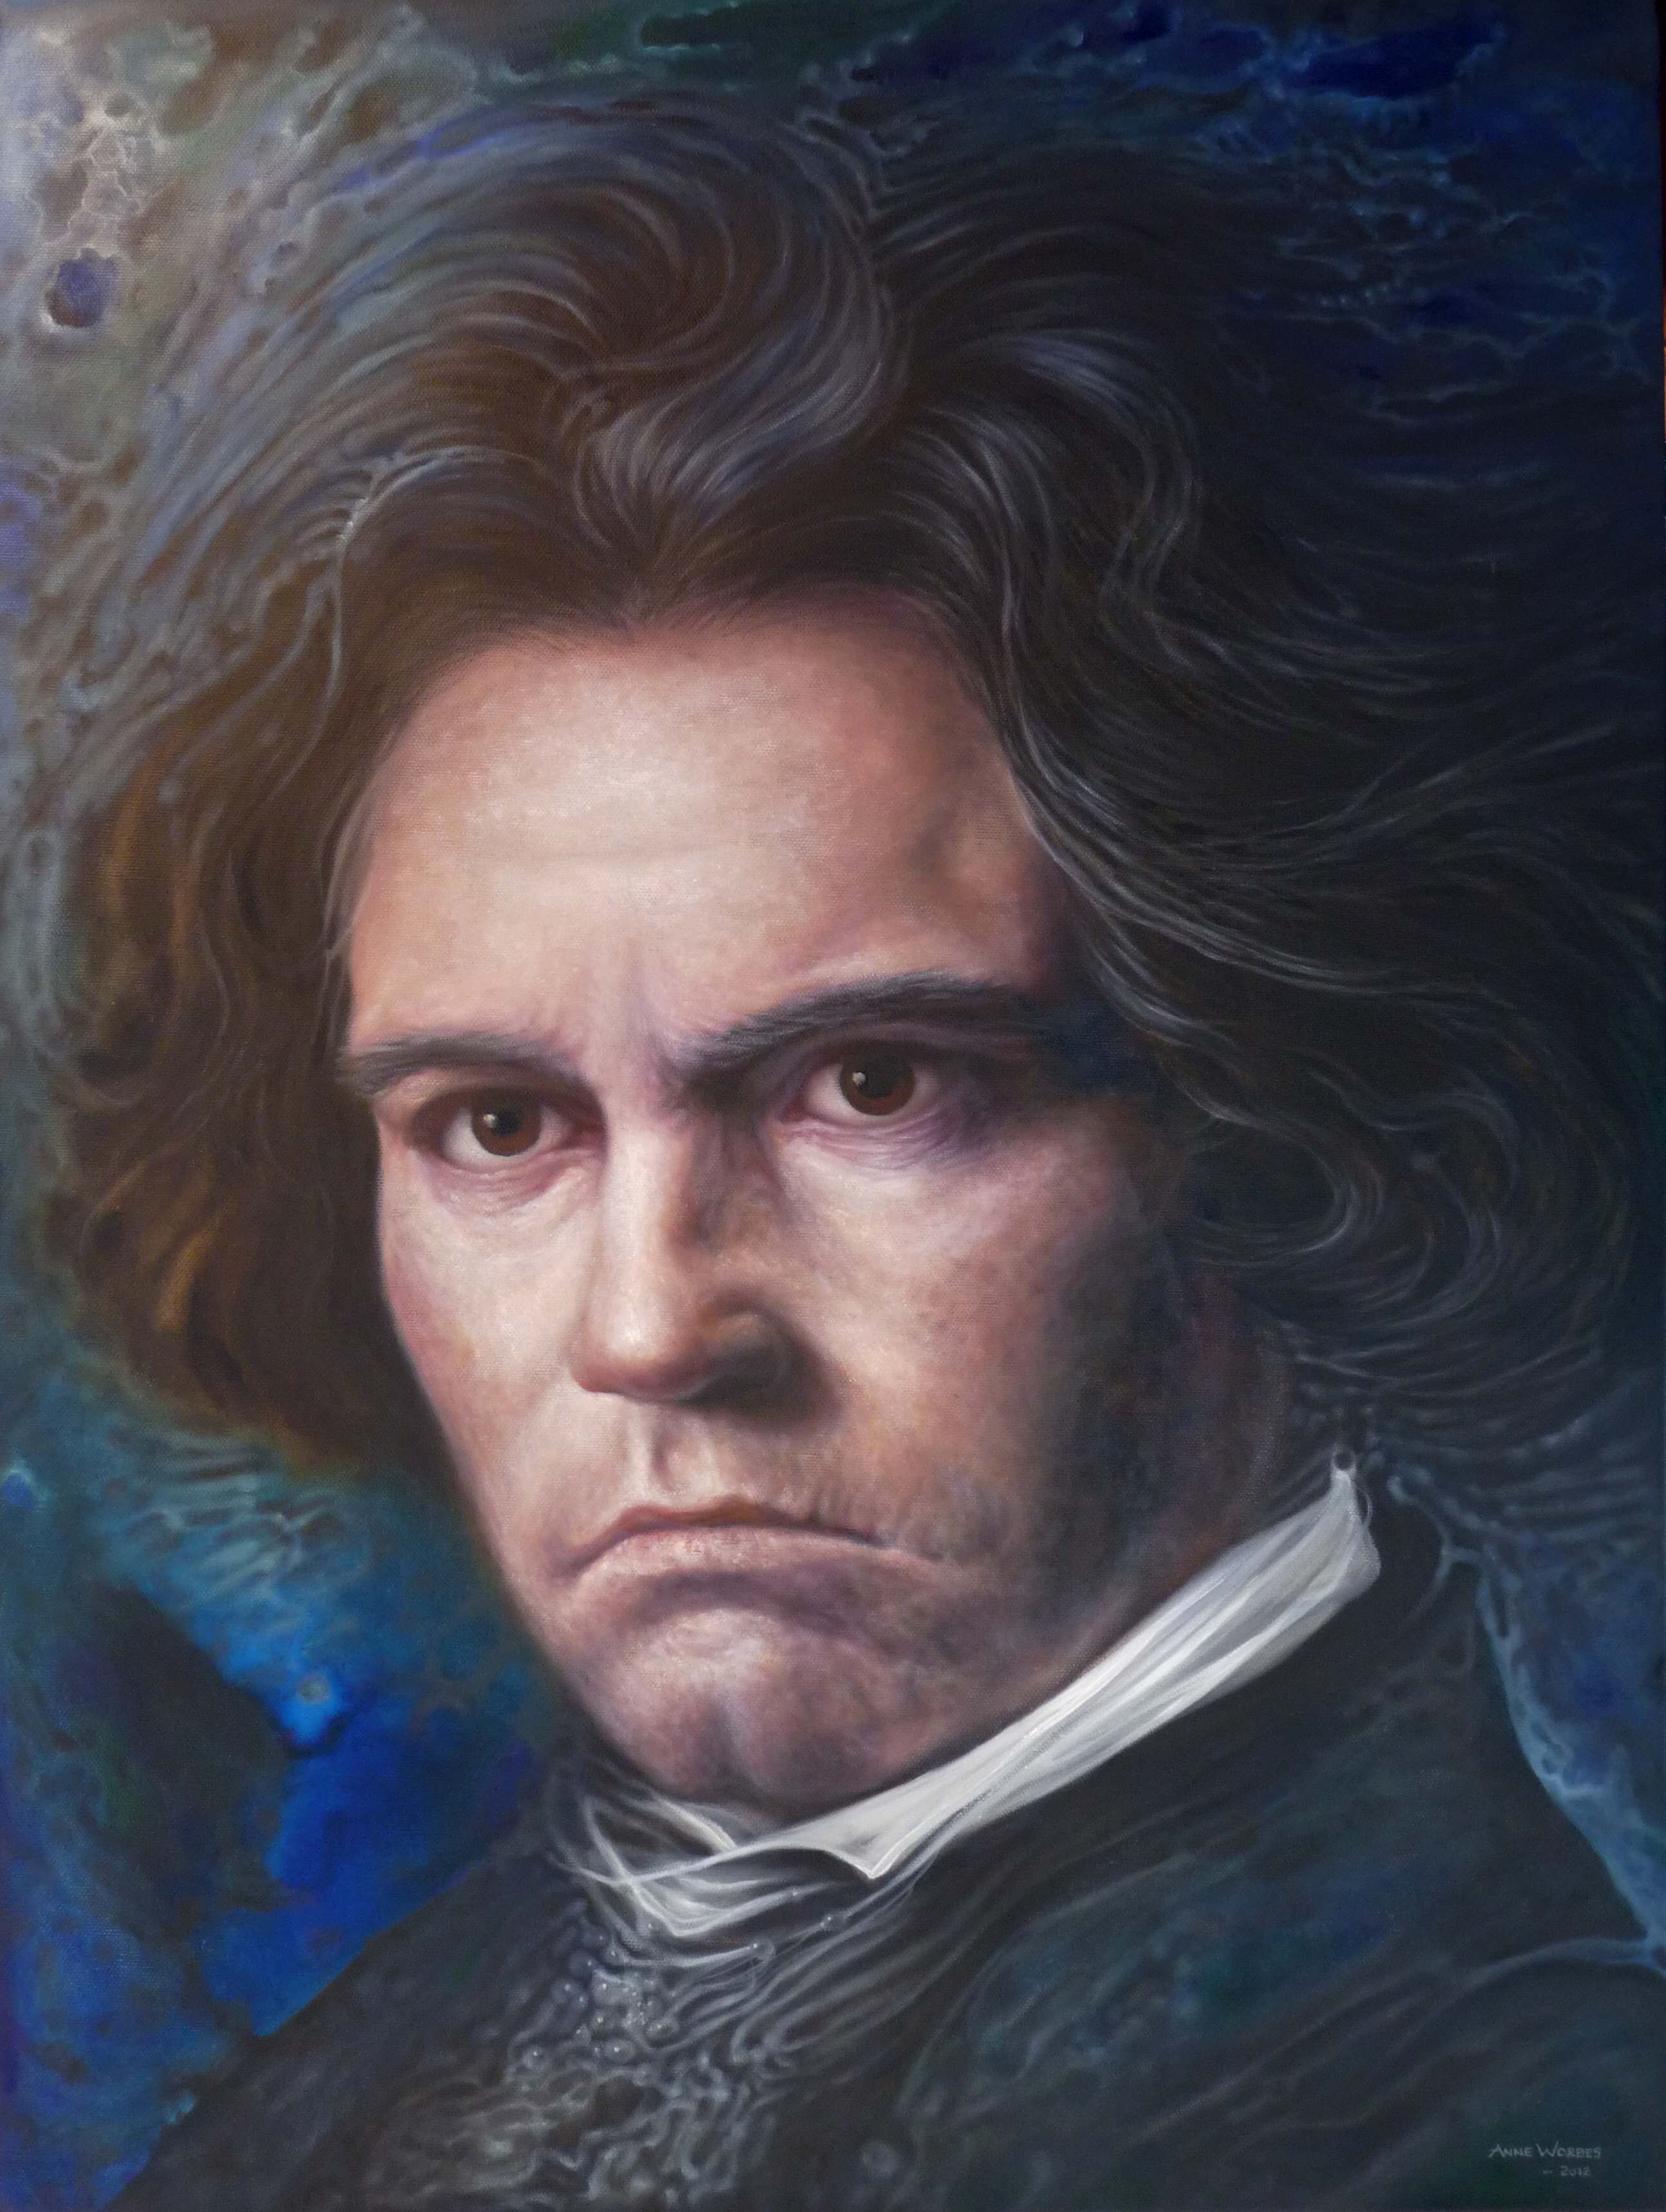 Beethoven Image Crazy Gallery